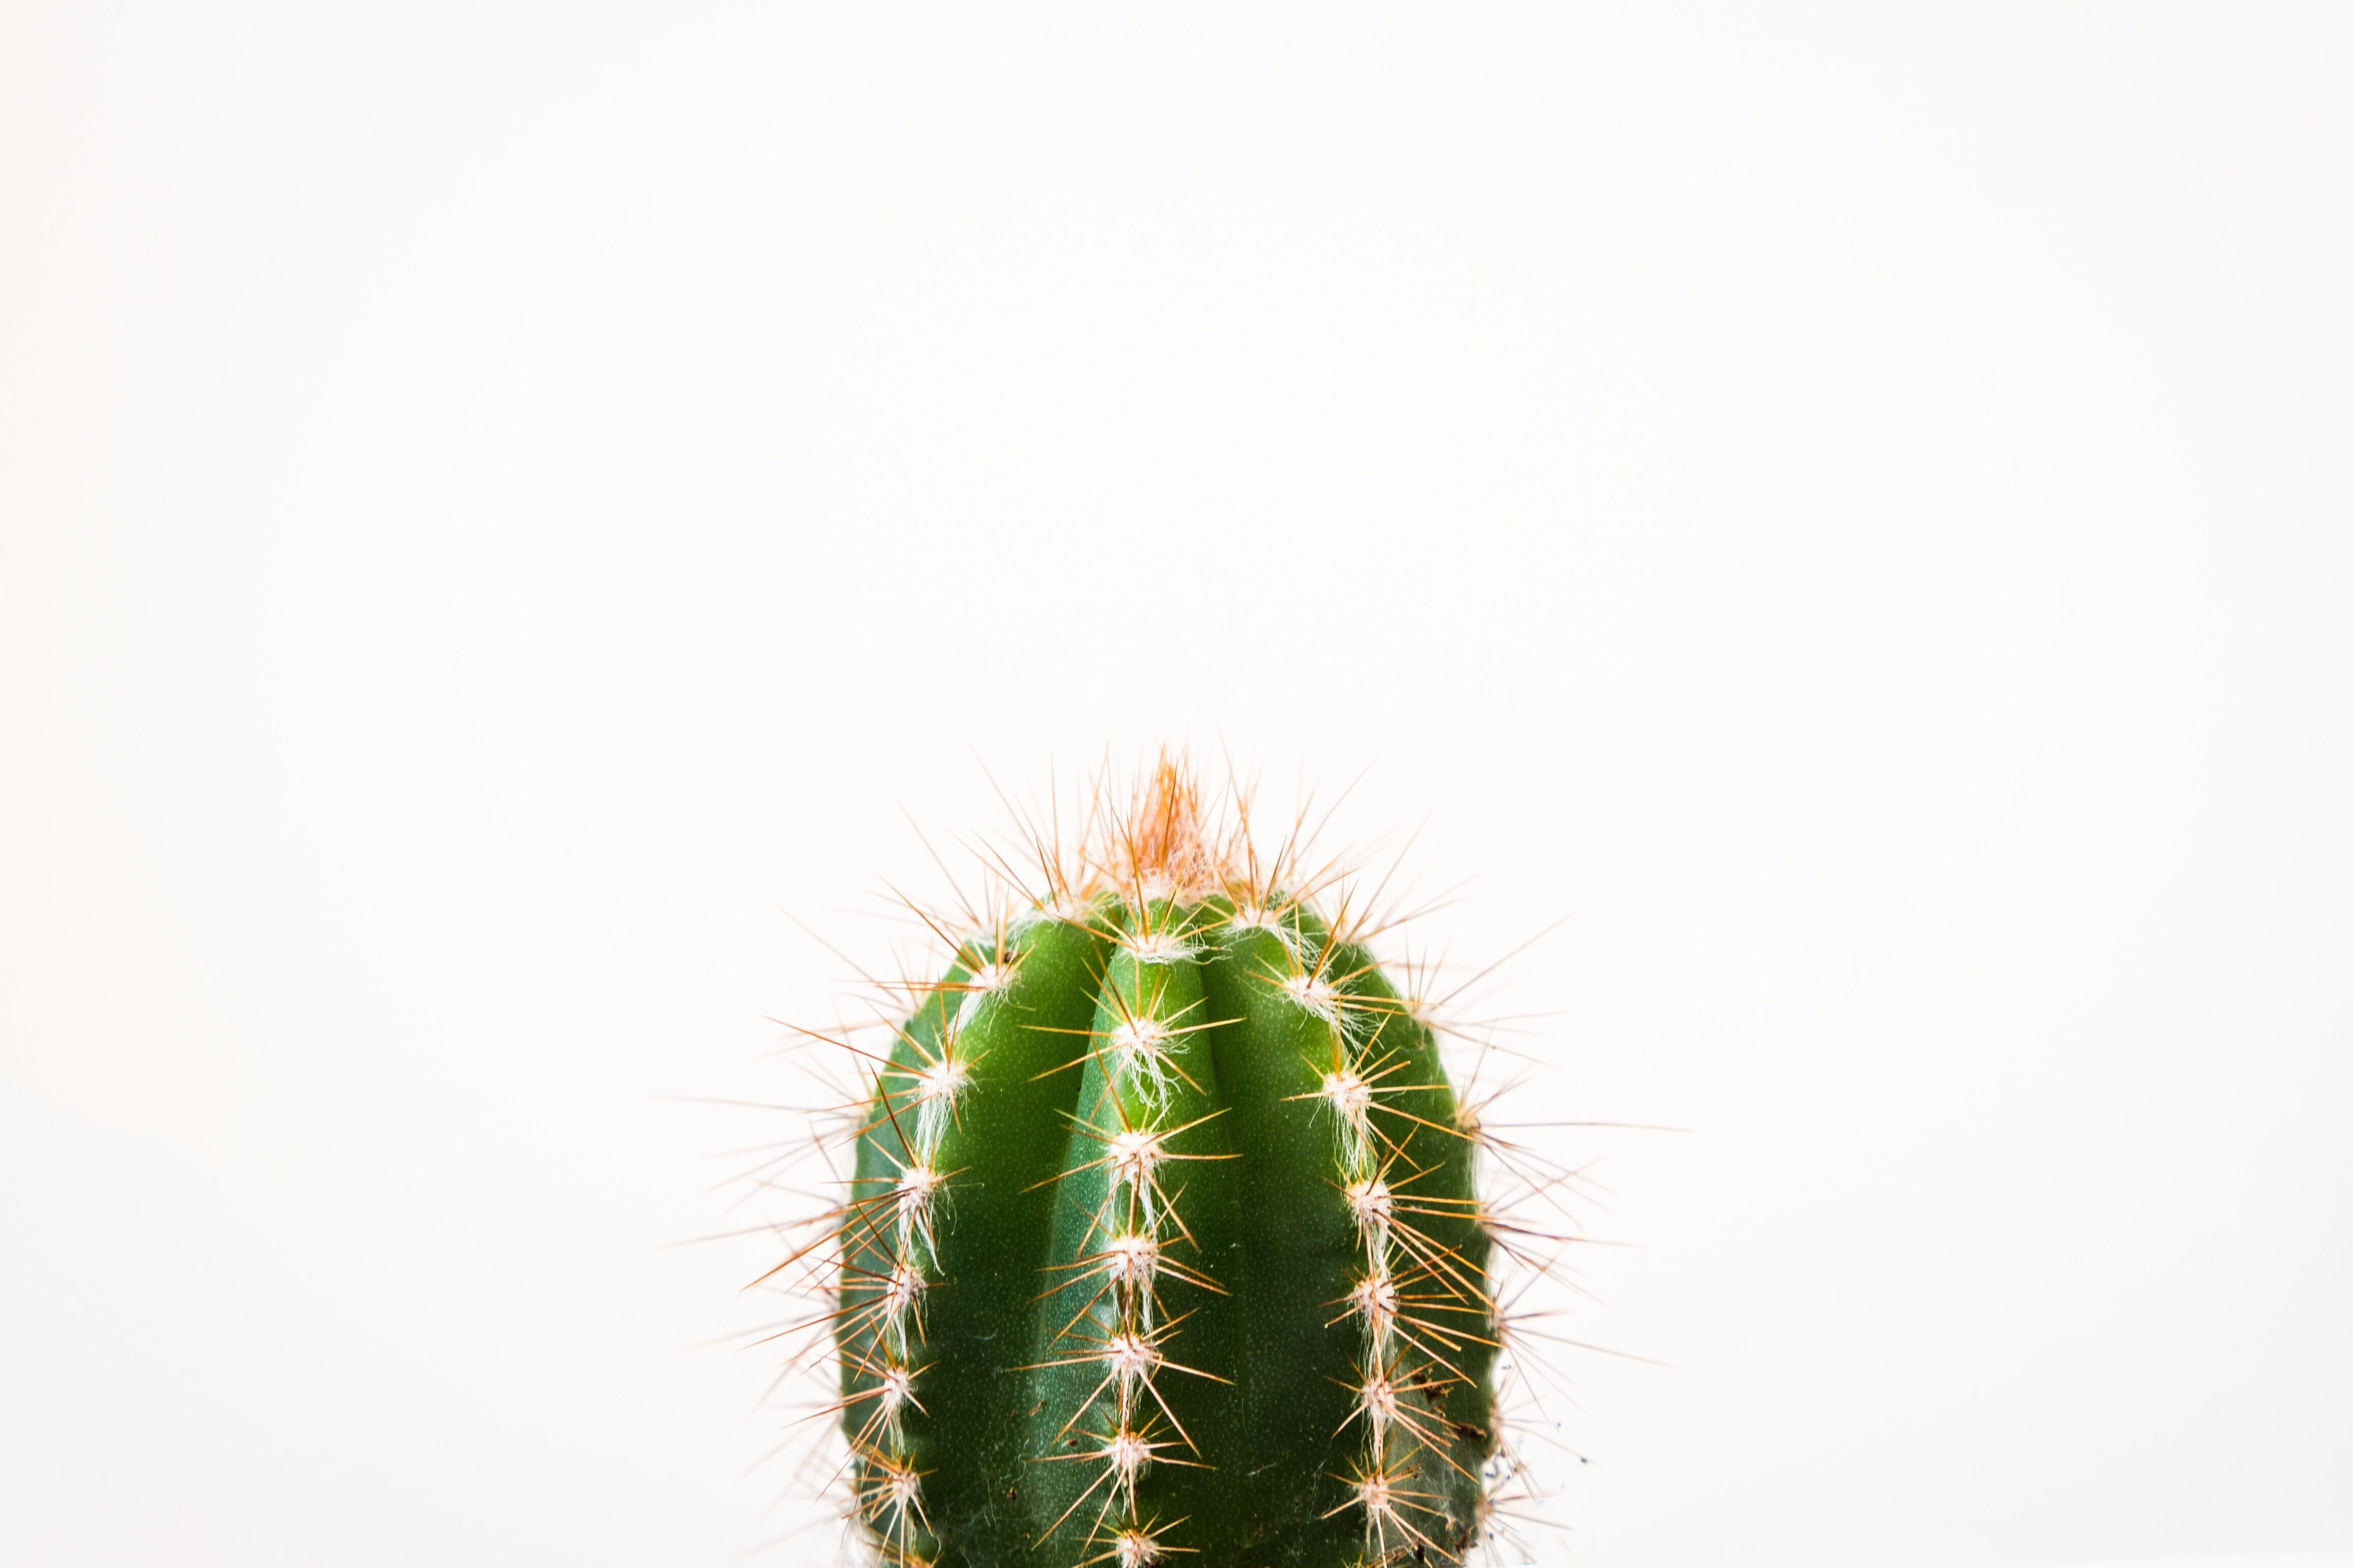 A green cactus with yellow needles against a white background.